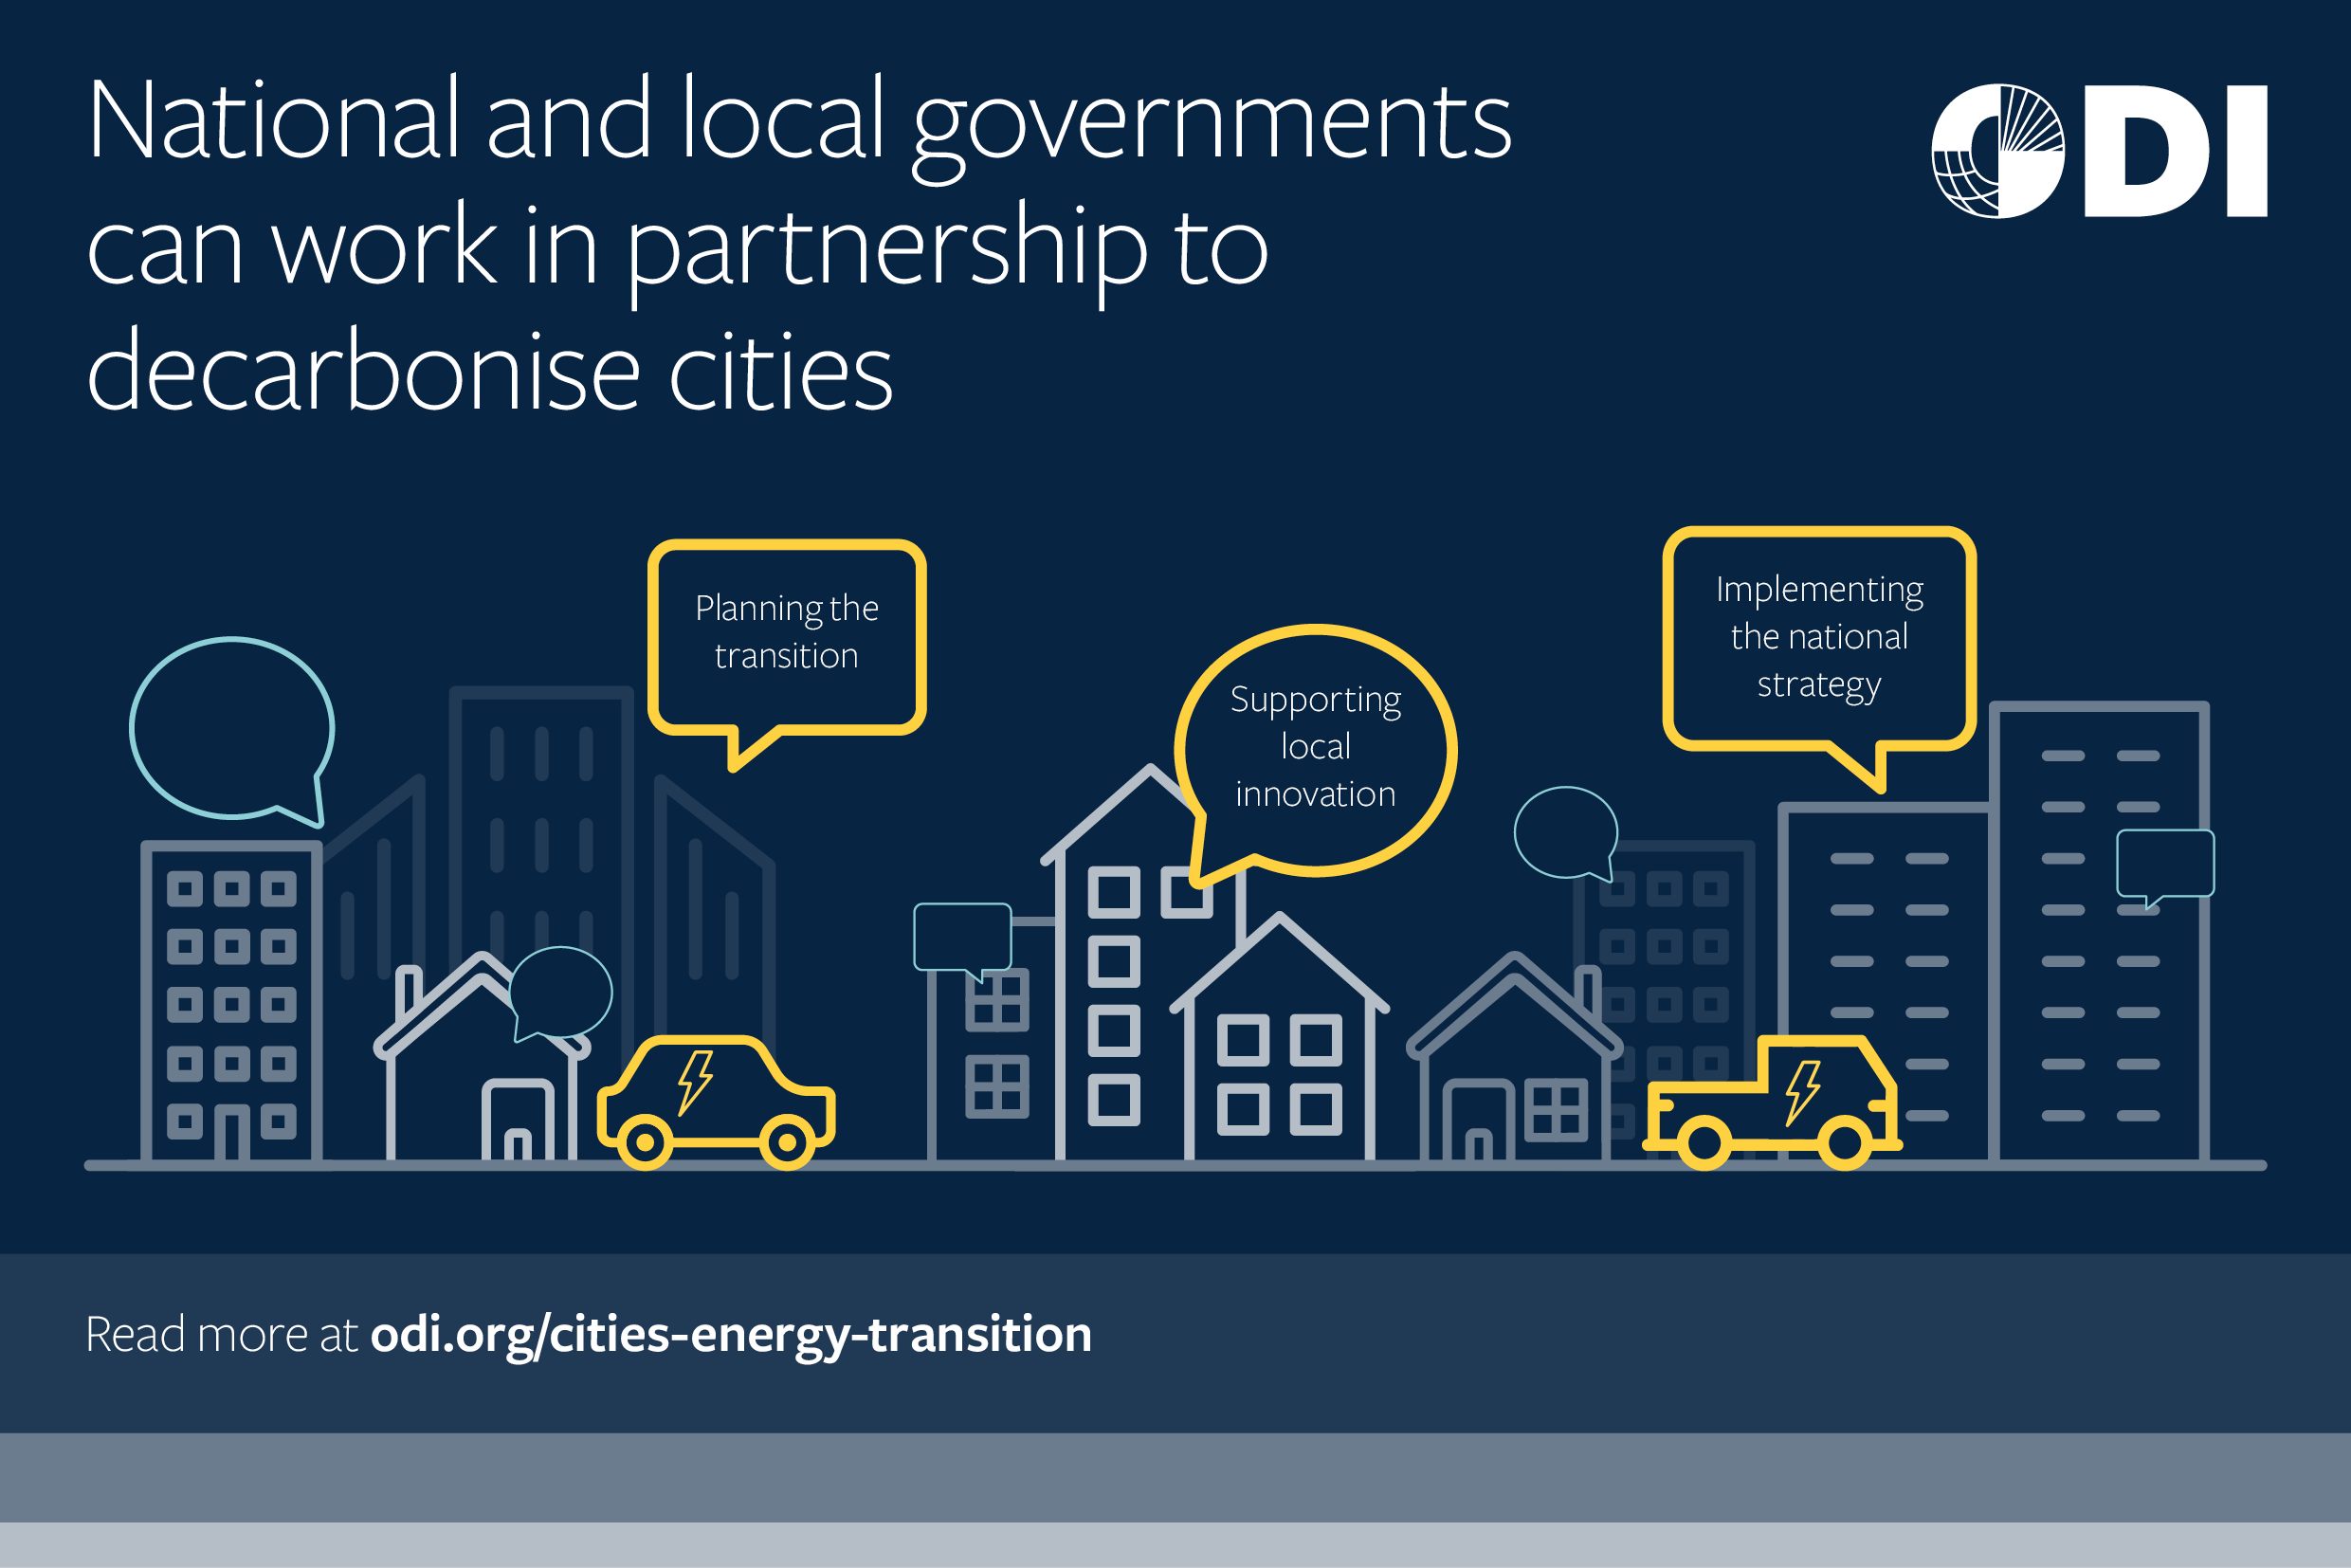 National and local governments can work in partnership to decarbonise cities.